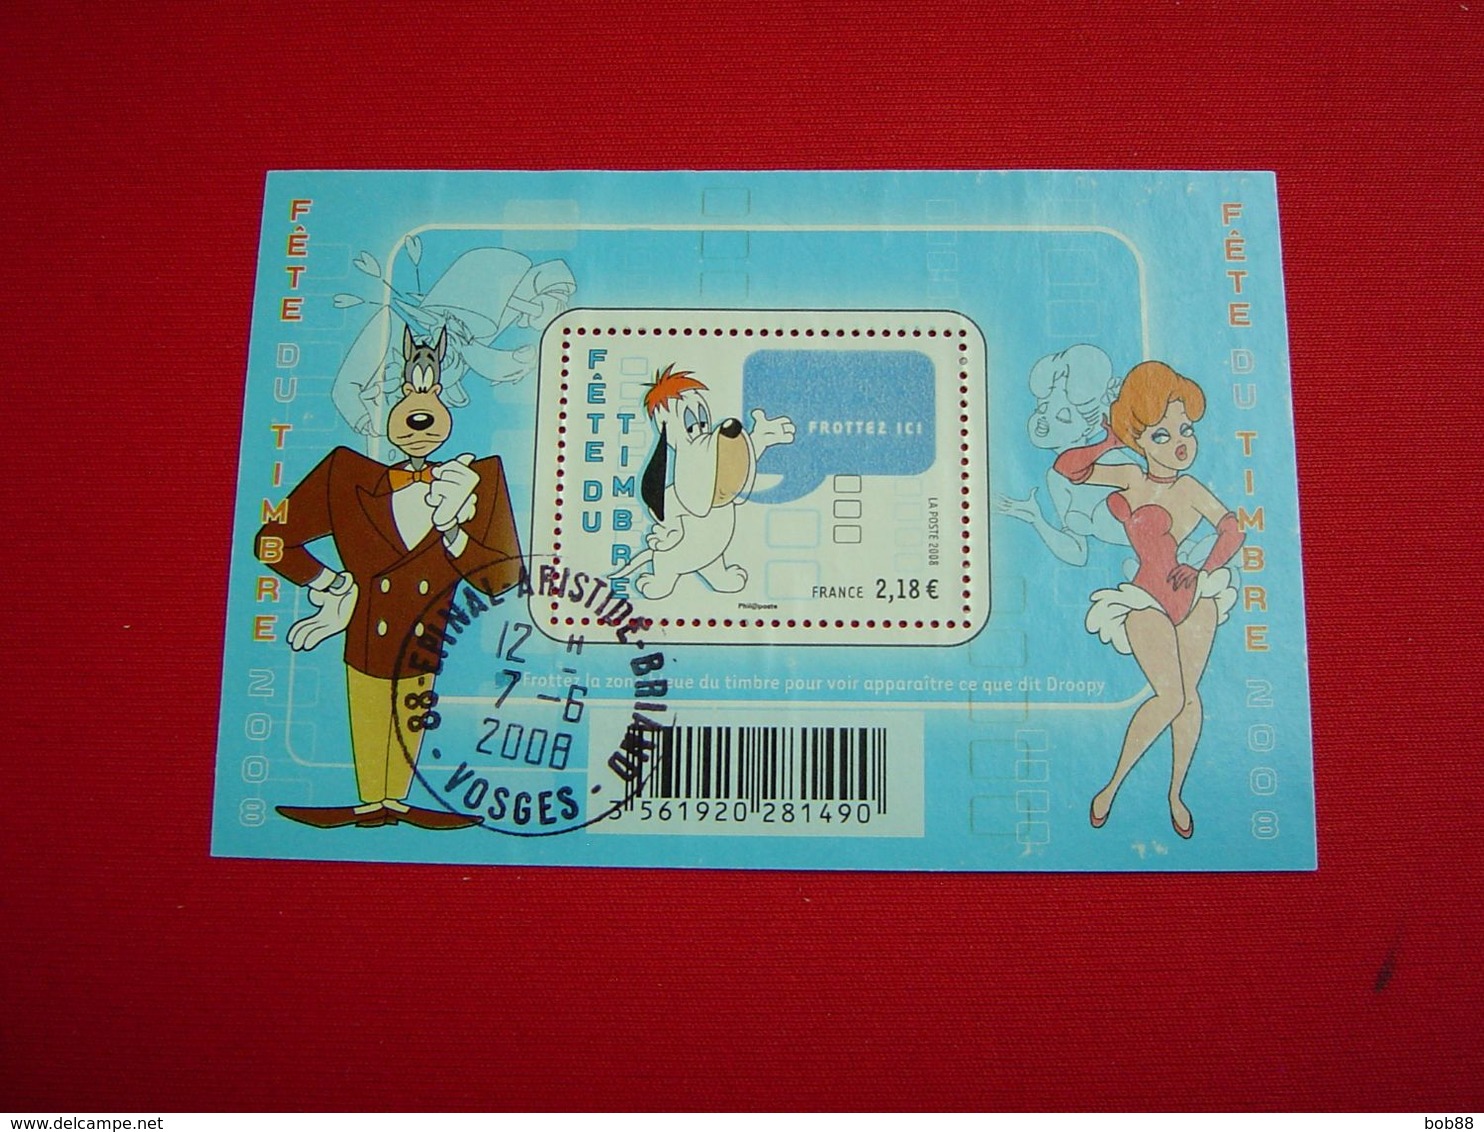 BLOC FEUILLET N° 116 / FETE DU TIMBRE 2008 / DROOPY / TEX AVERY / OBLITERE - Used